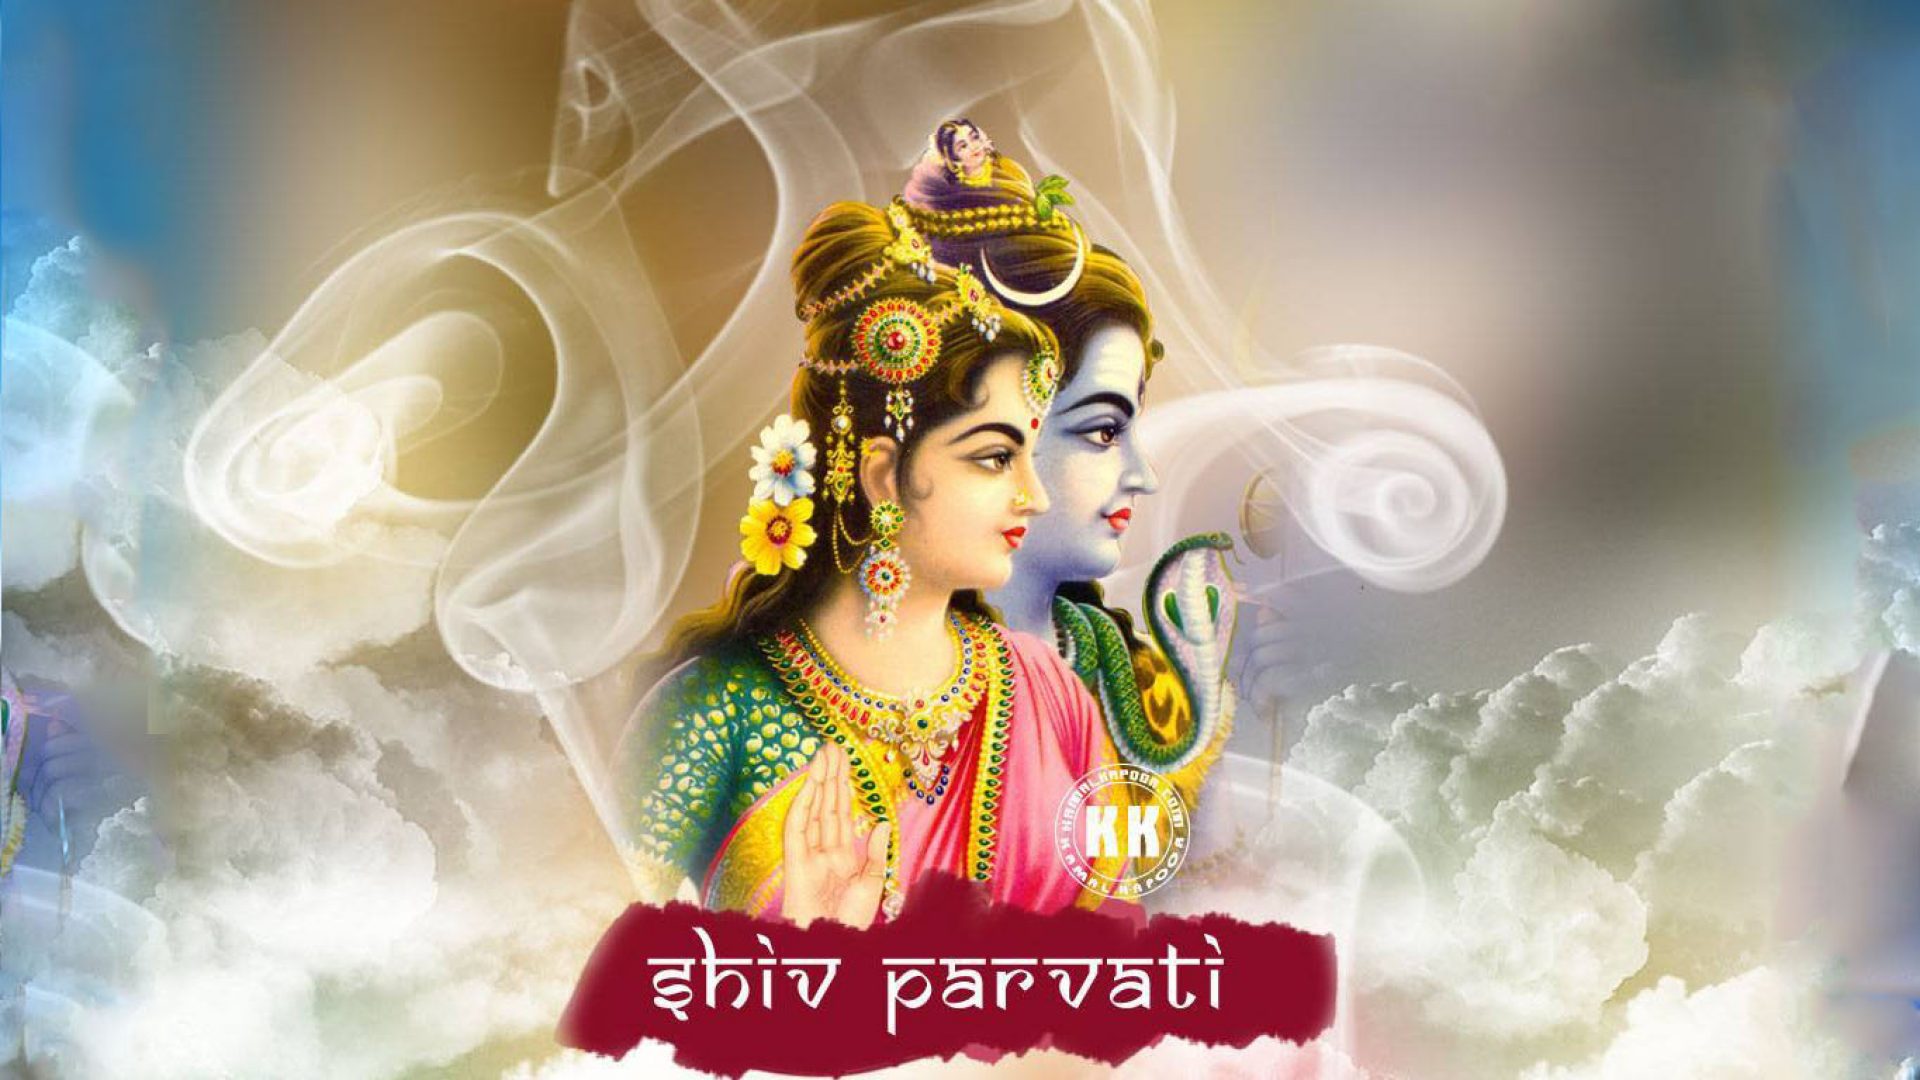 Lord Shiva And Parvati Love Making.